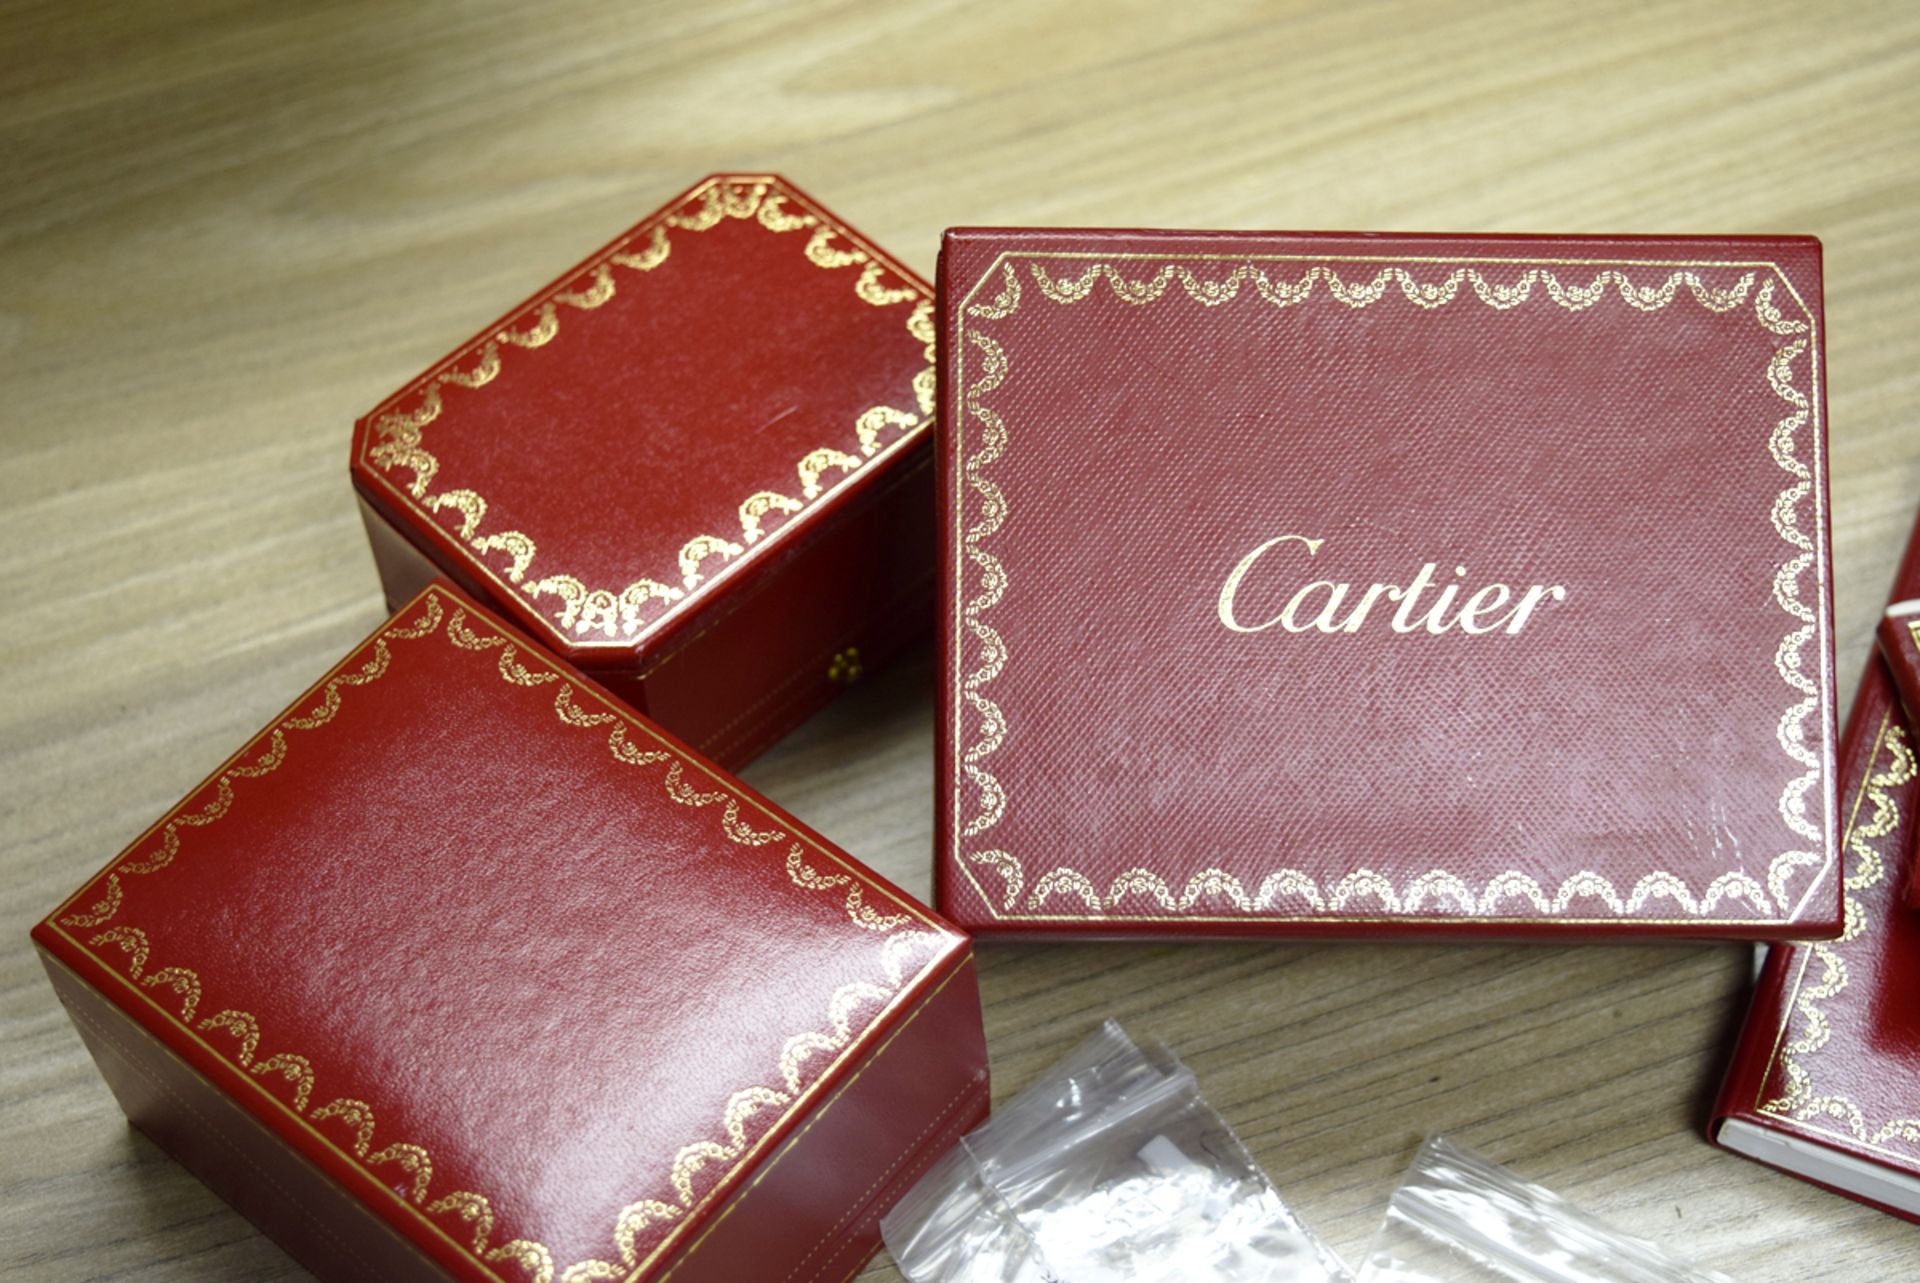 ROLEX PARTS and CARTIER BOX's & DOCUMENTS - Image 5 of 5